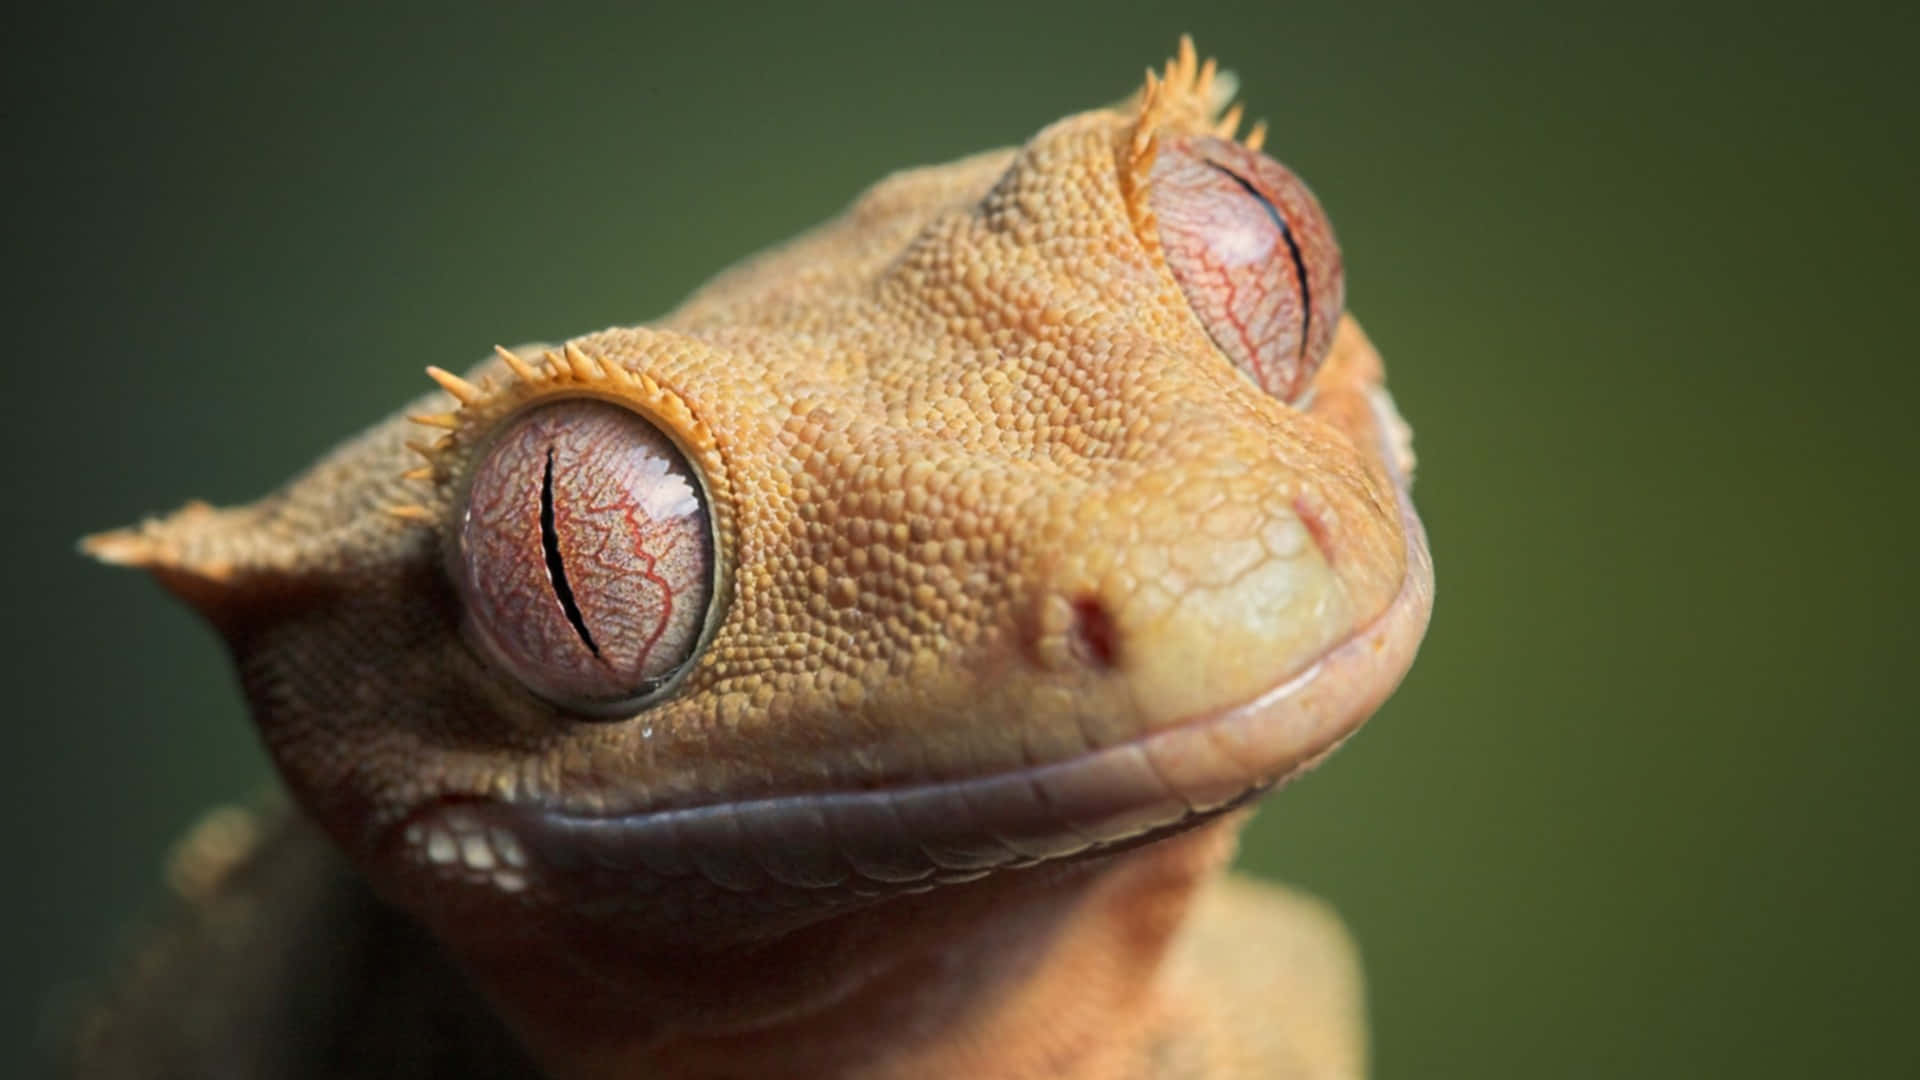 Gecko Lizard Smiling Close Up Picture